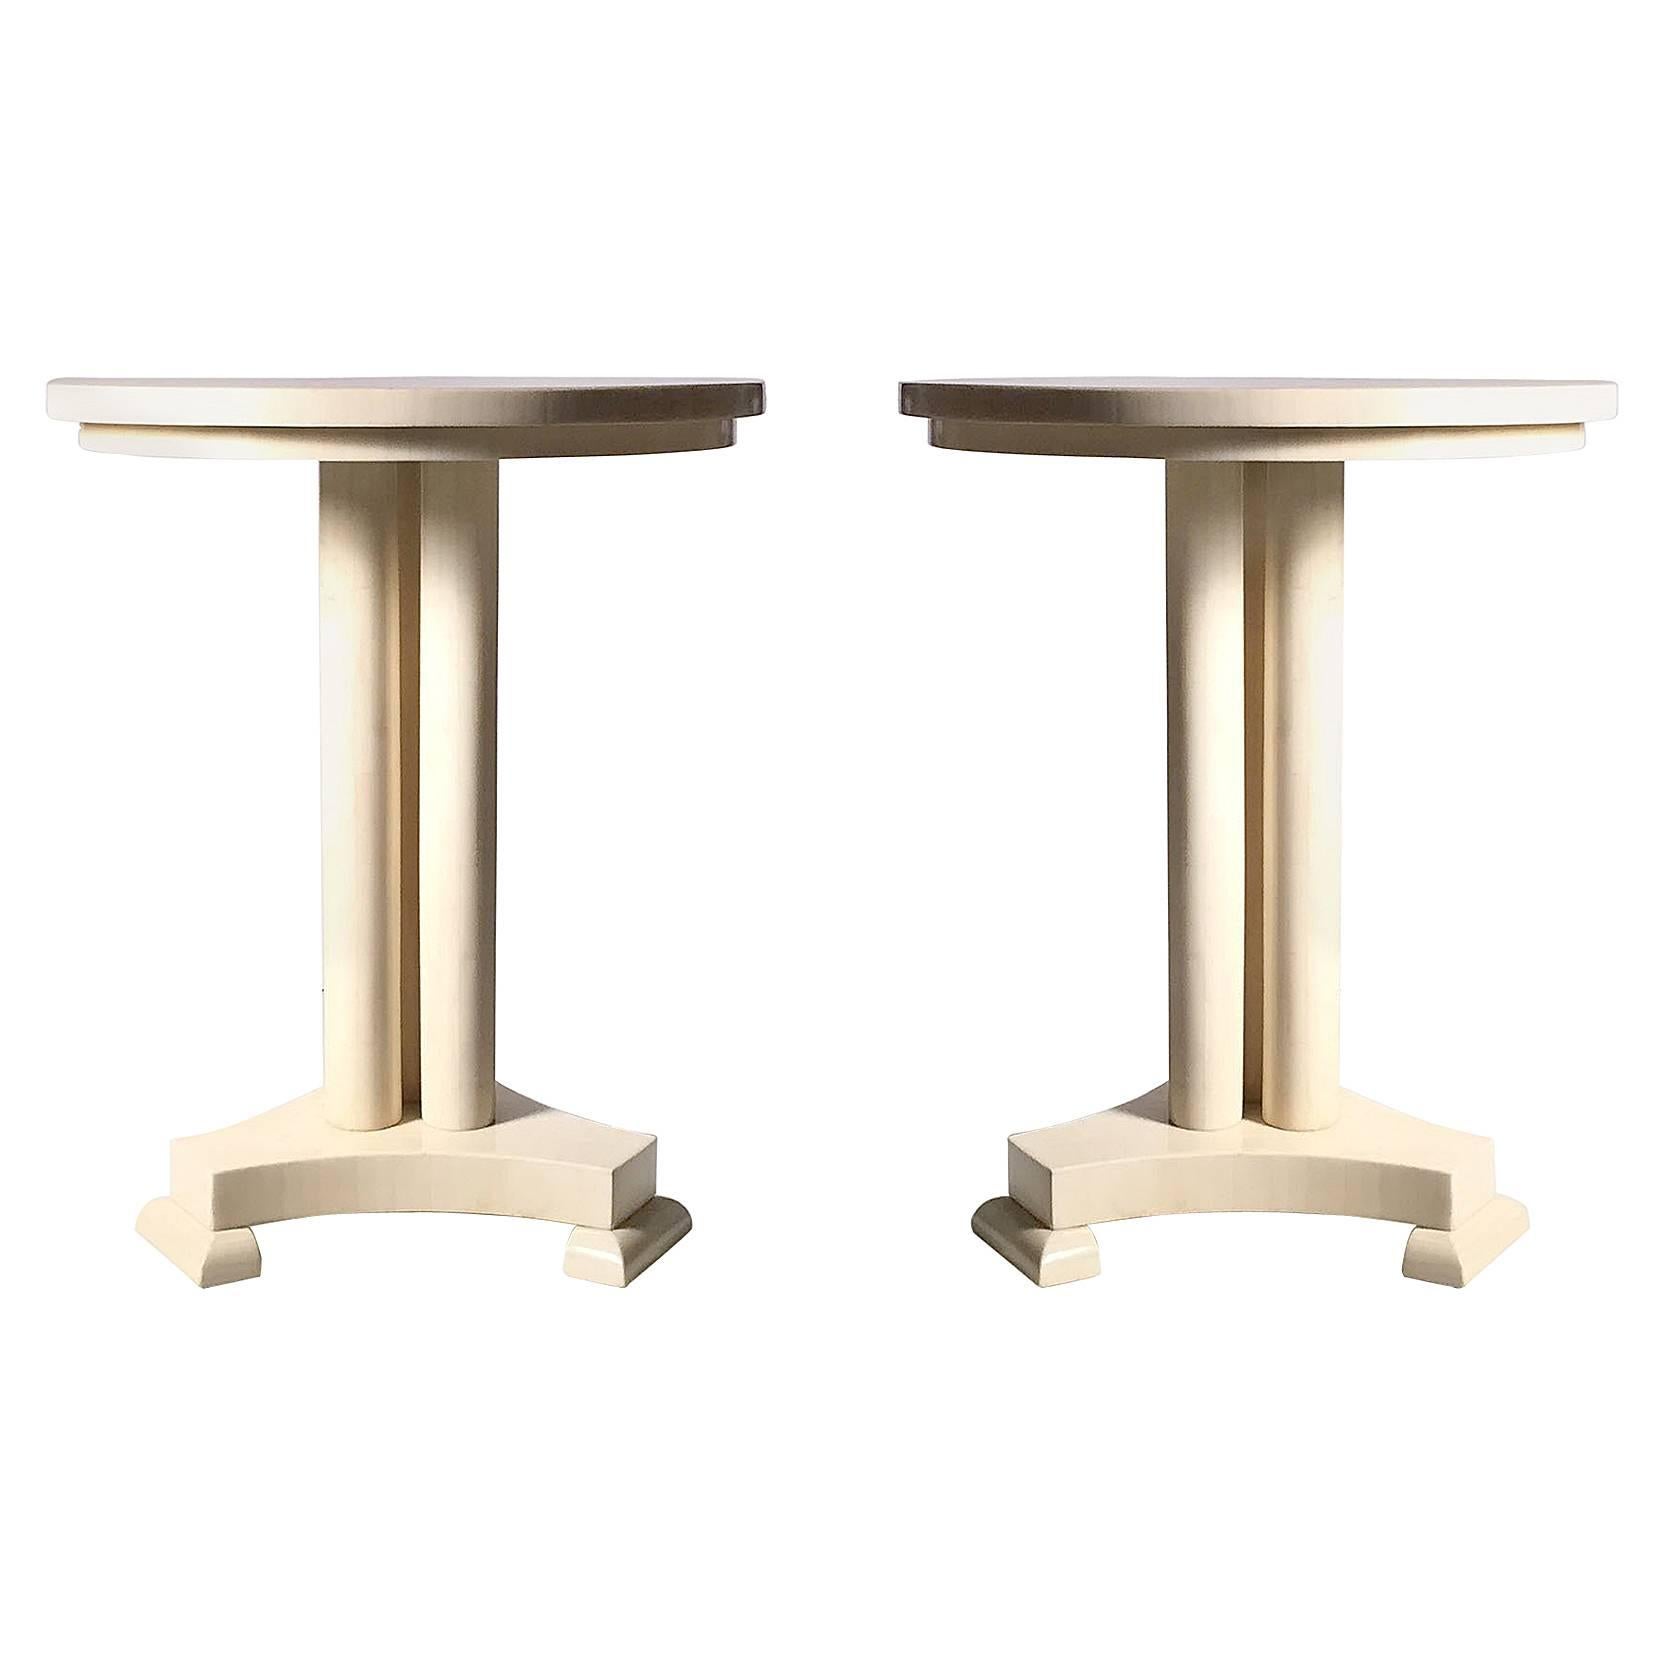 Classy Pair of Enrique Garcel Neoclassical Side Tables for Jimeco